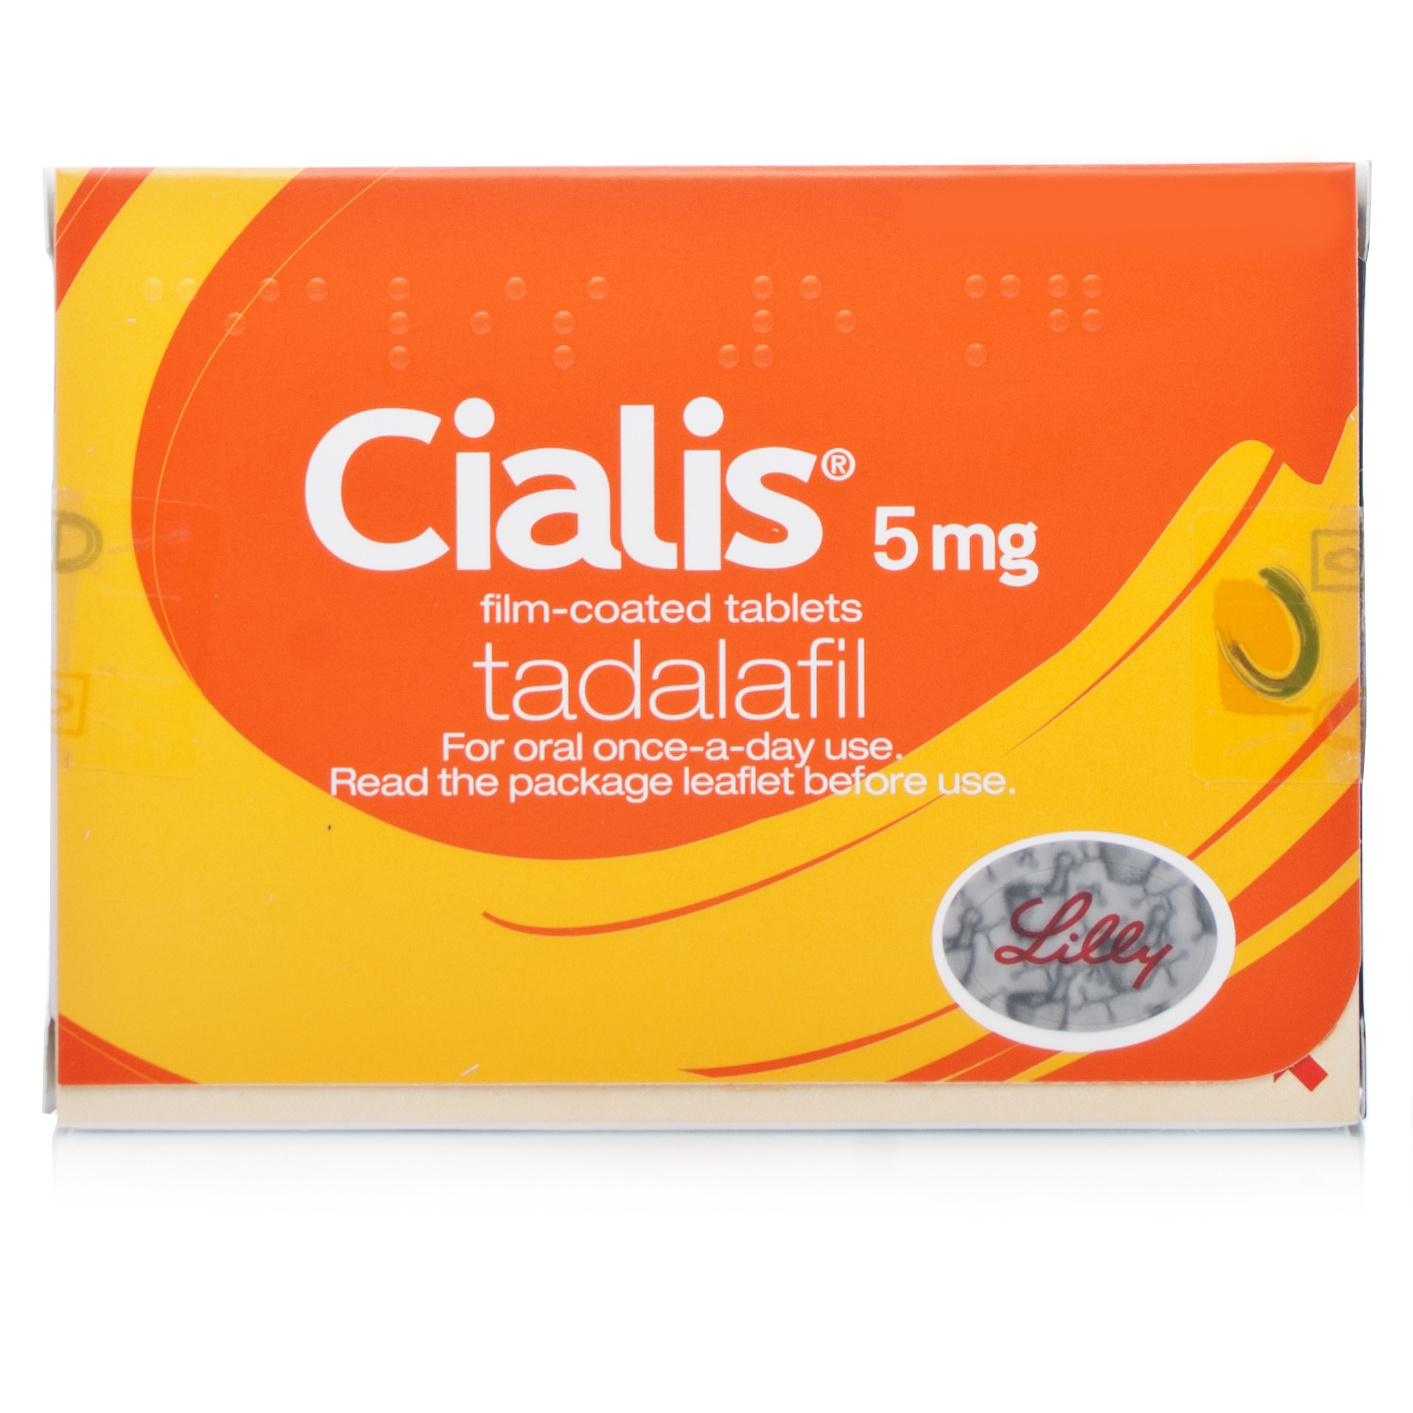 Can you get Cialis without a doctor visit?